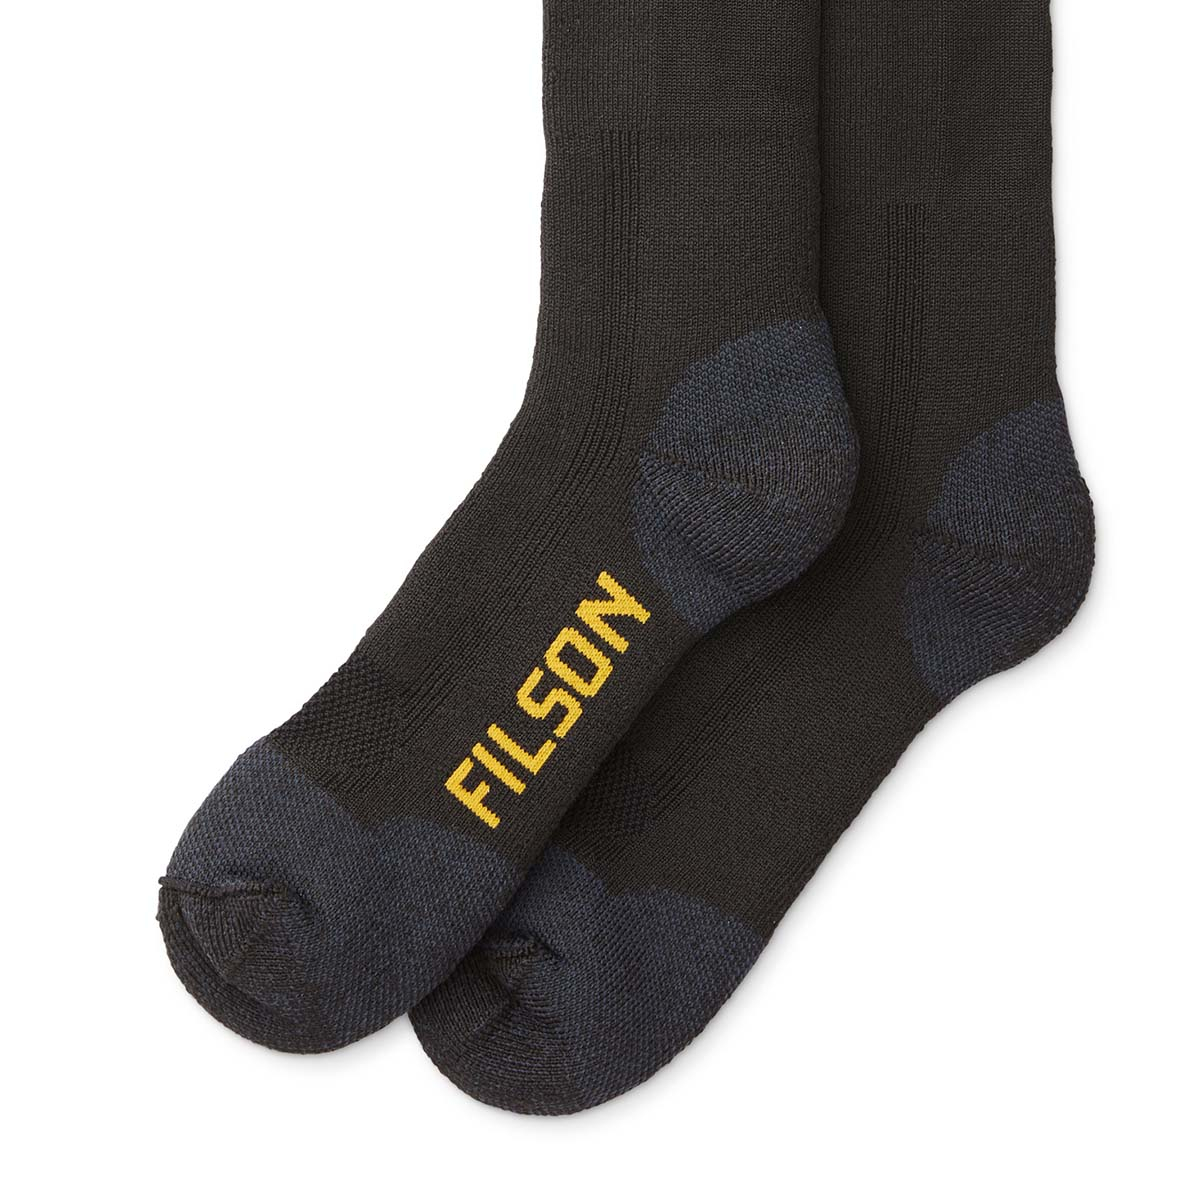 Filson Midweight Technical Boot Socks, Midweight blend of performance and durability.